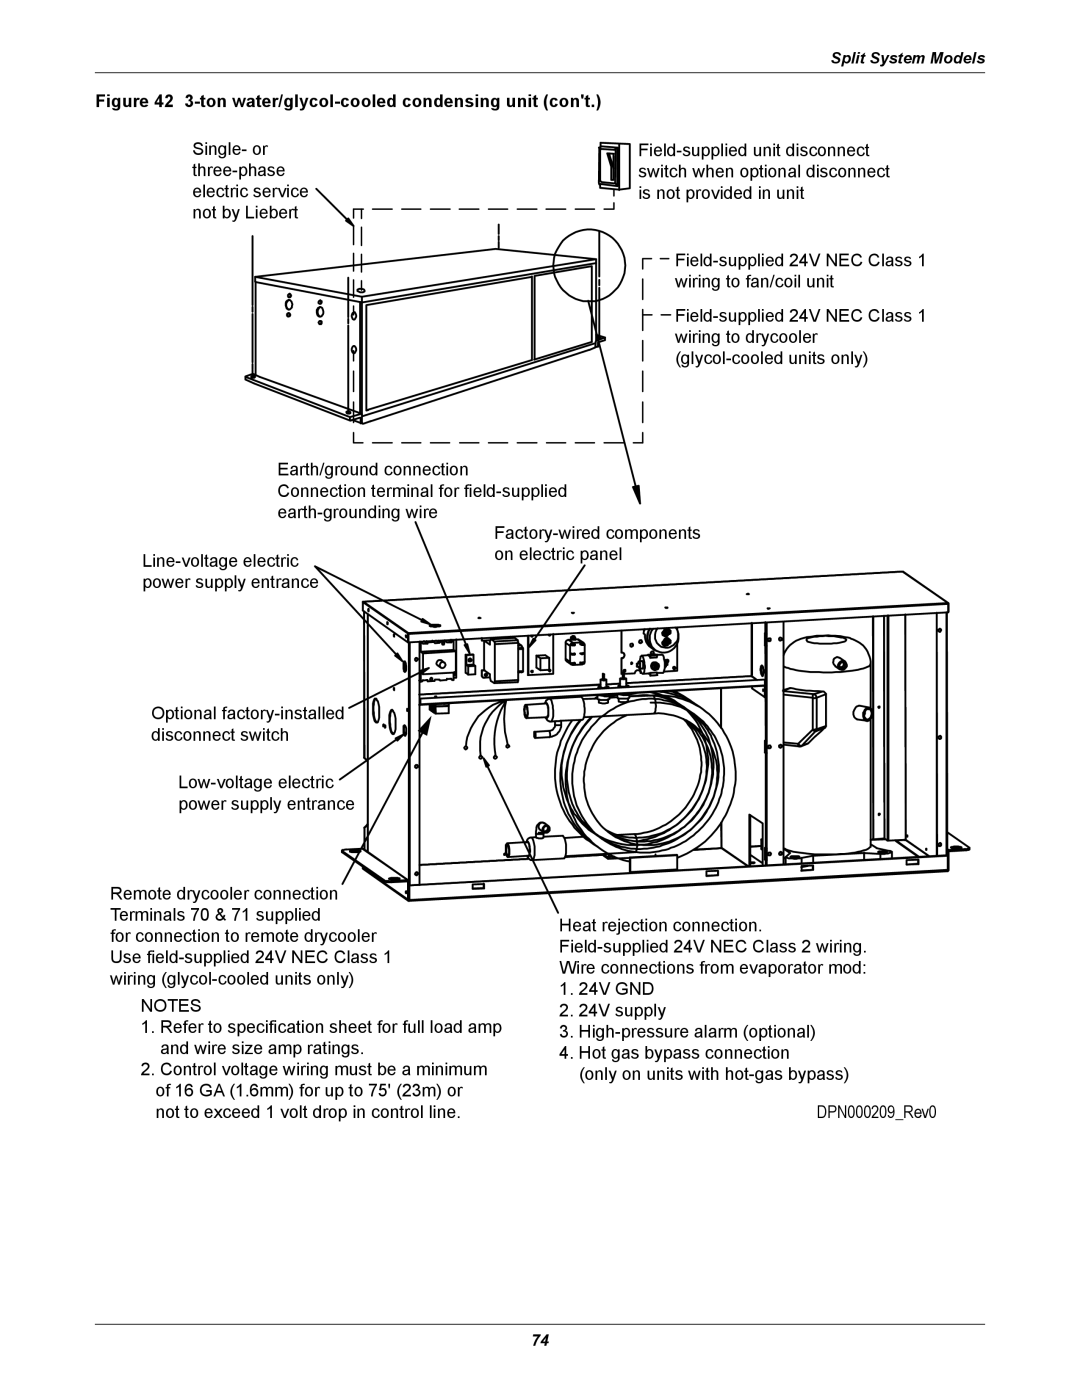 Emerson 3000 installation manual Factory-wiredcomponents 